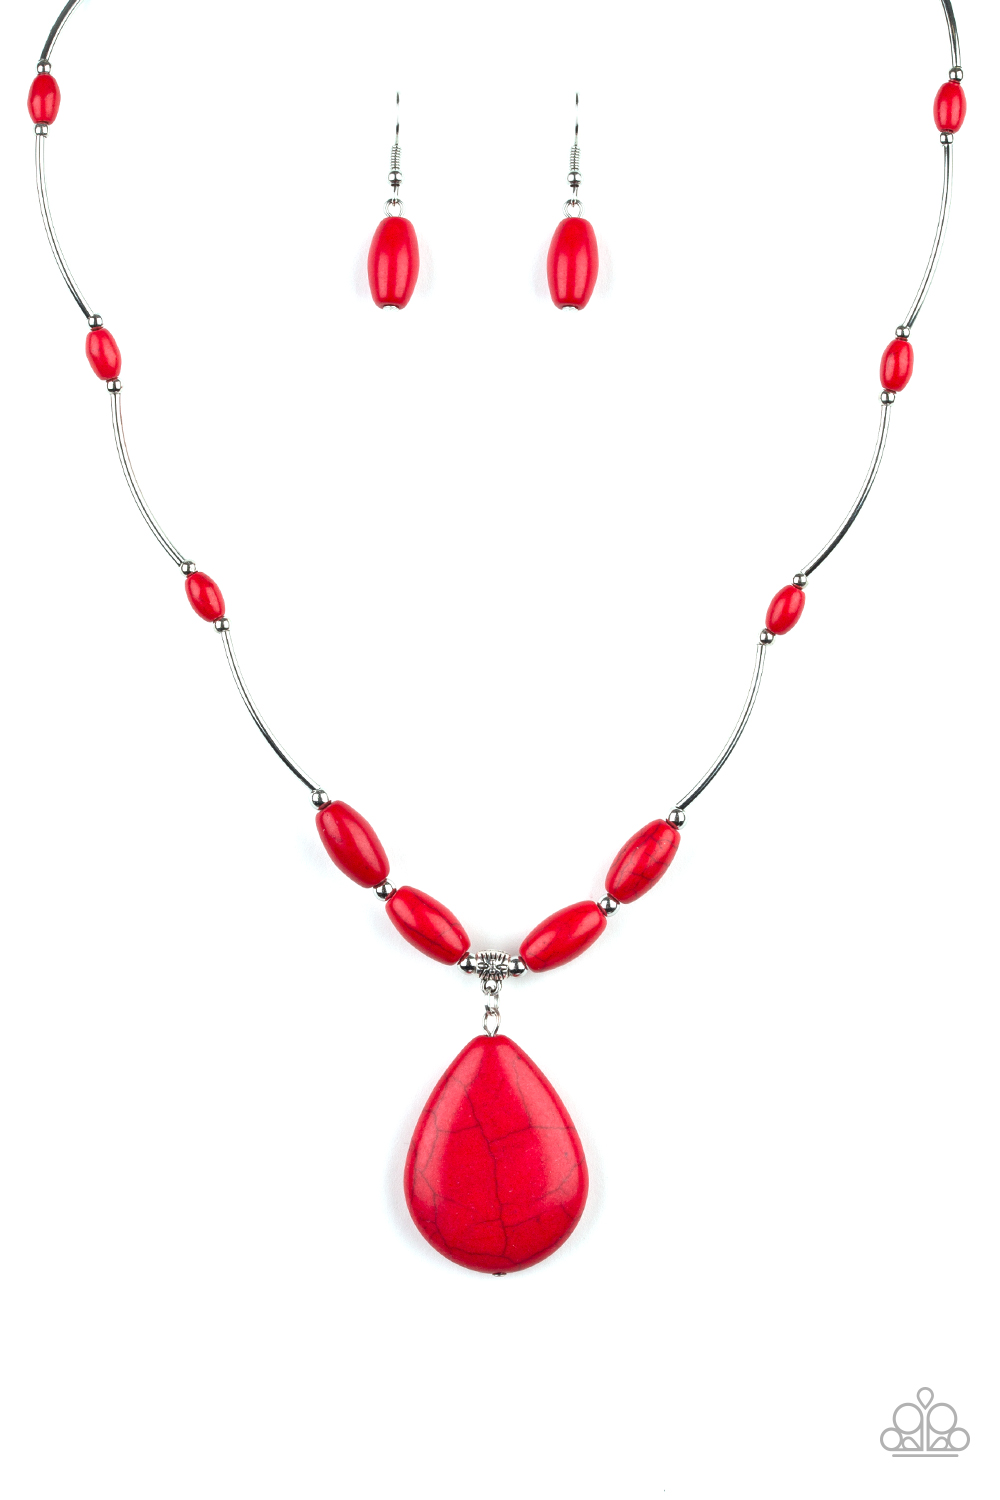 Paparazzi Accessories: Explore The Elements - Red